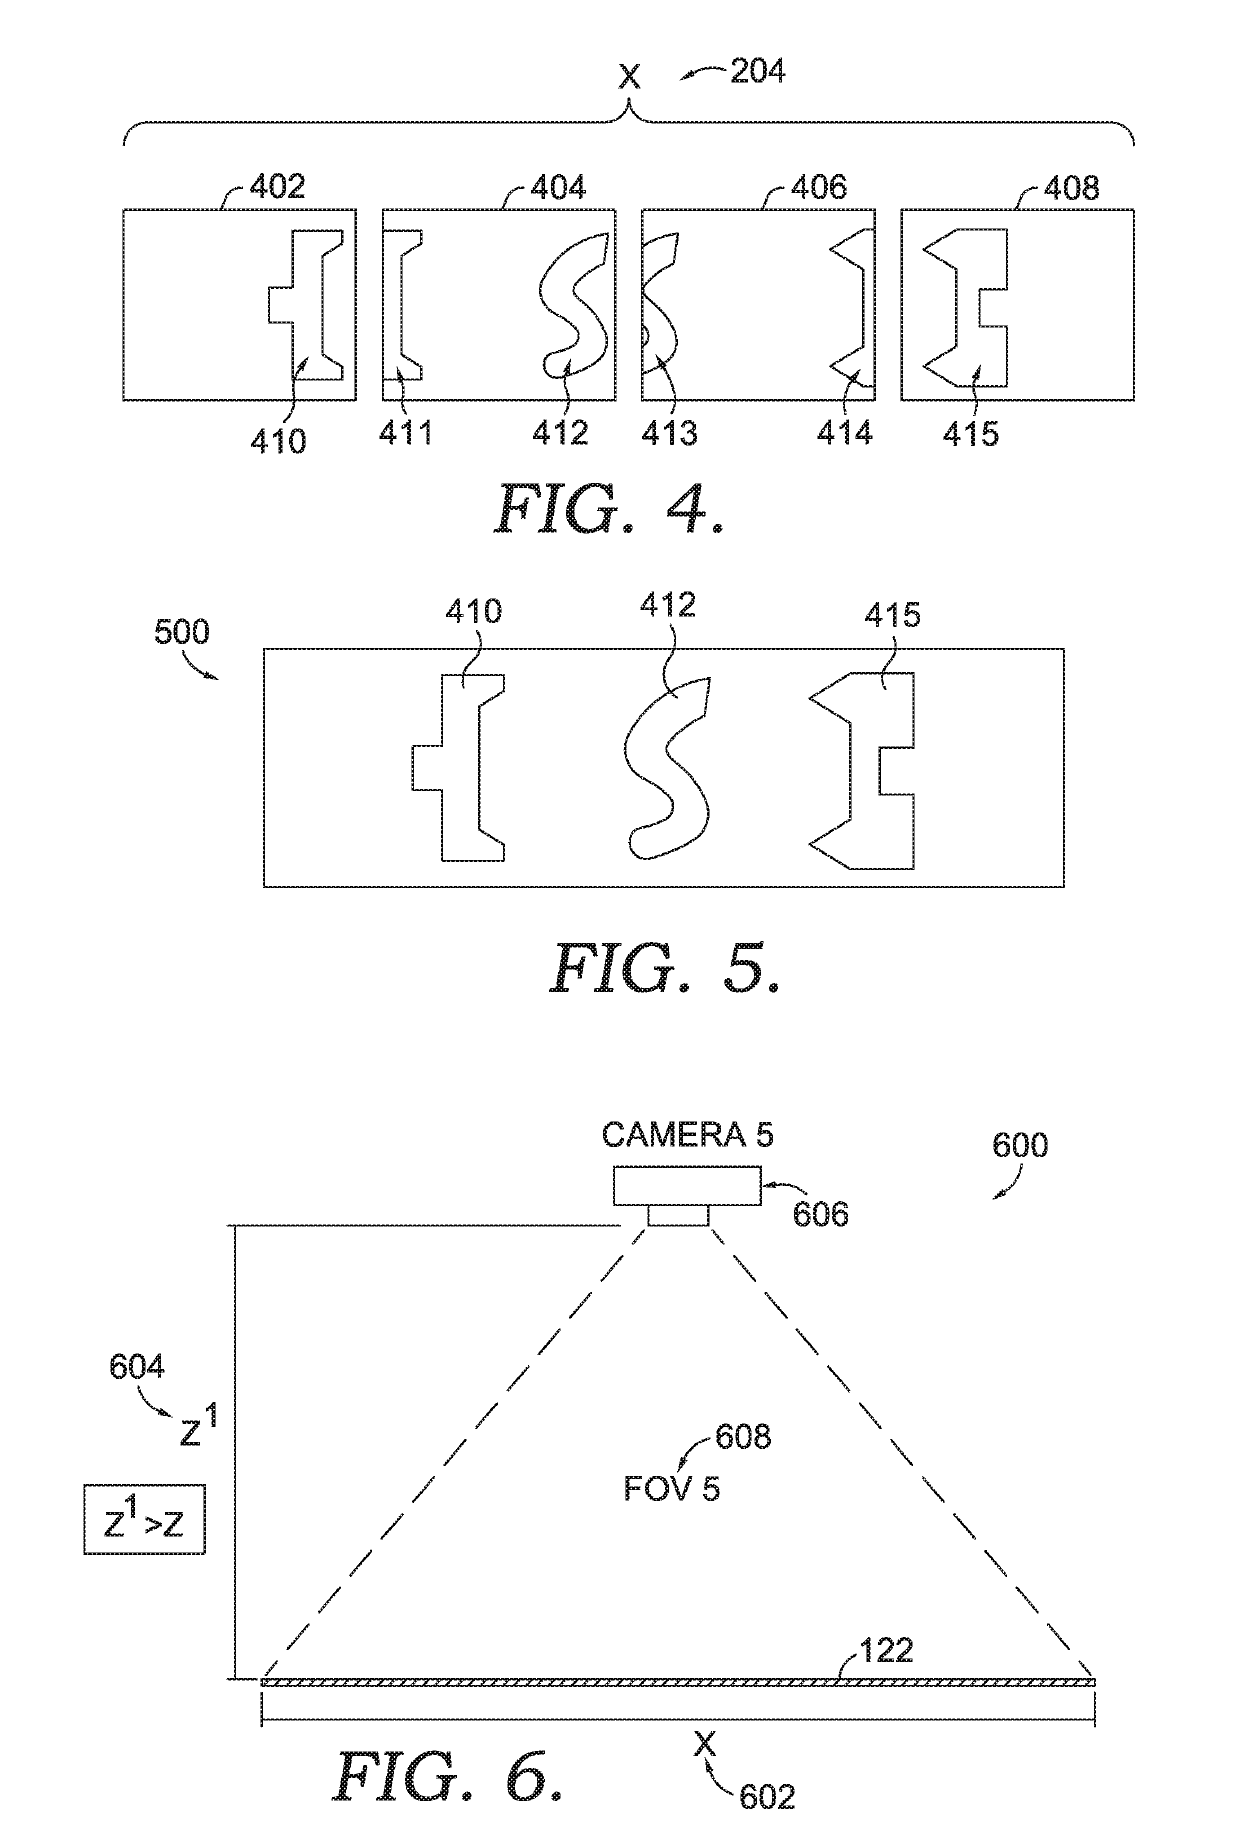 Image stitching for footwear component processing